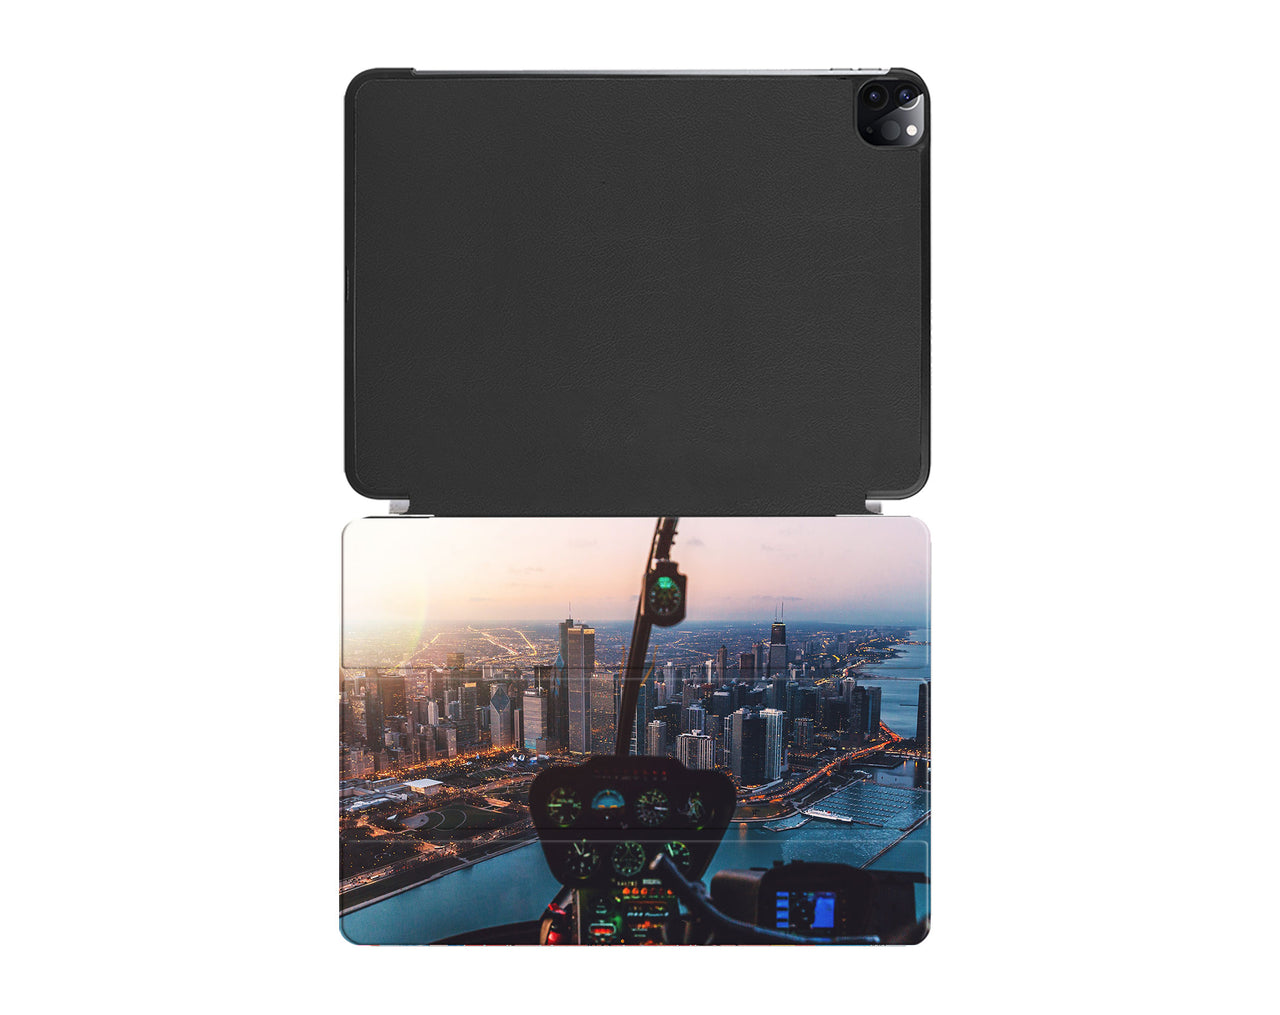 Amazing City View from Helicopter Cockpit Designed iPad Cases